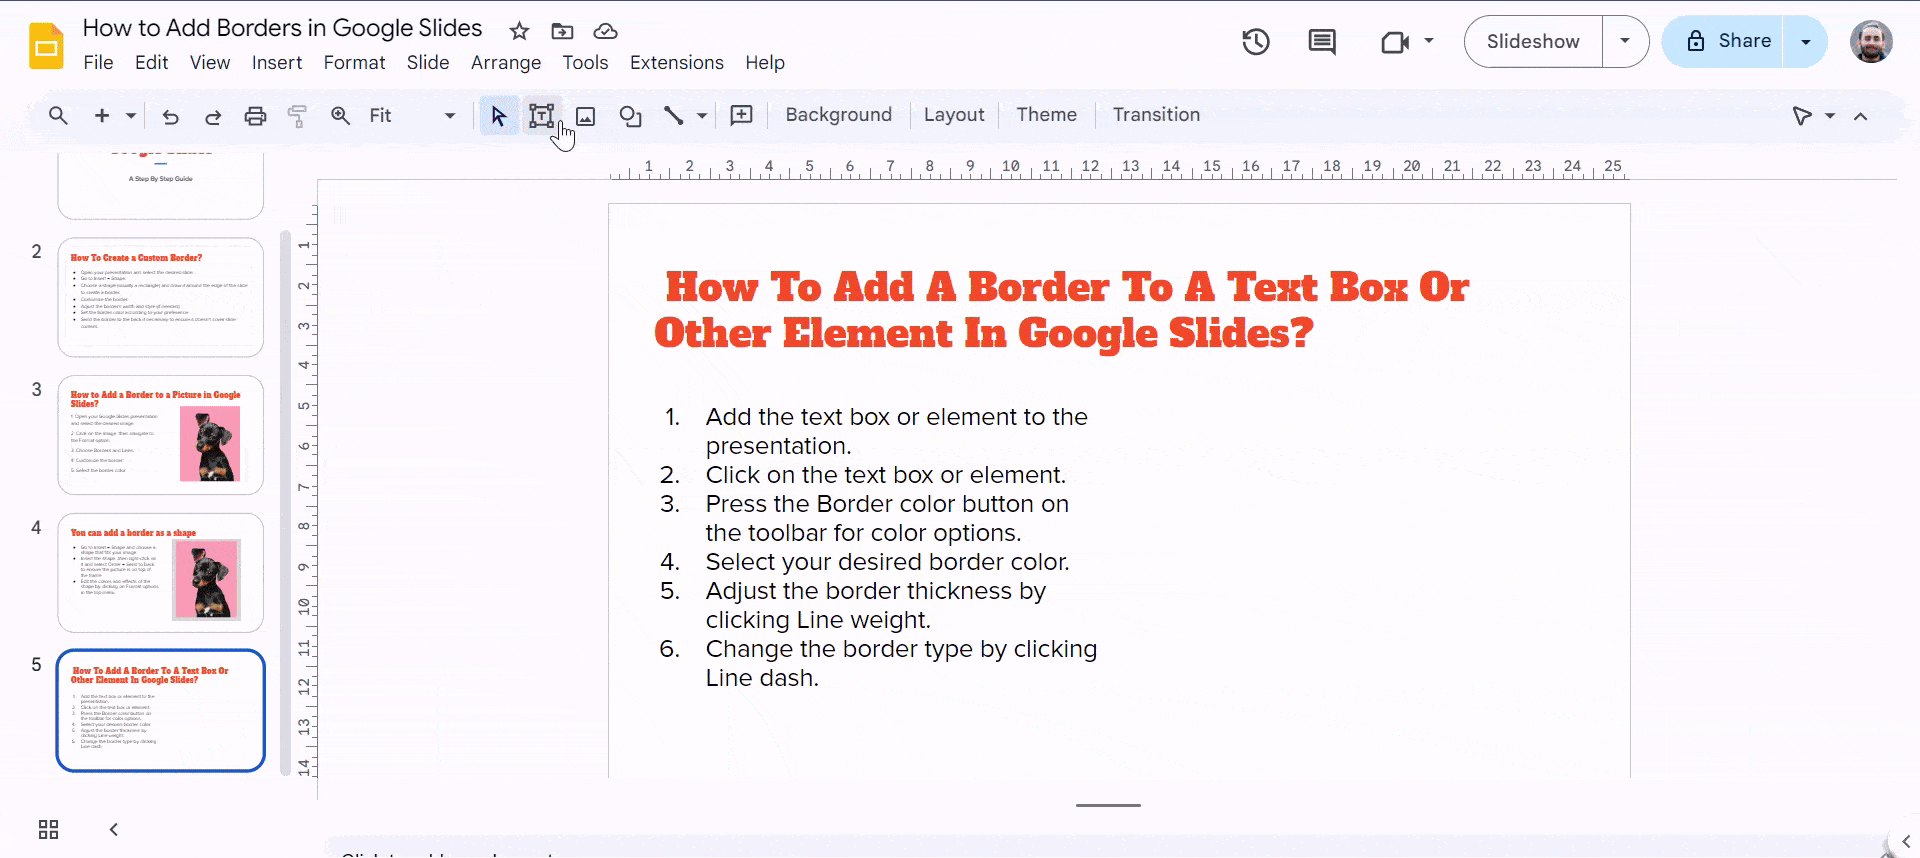 Add a Border to A Text Box